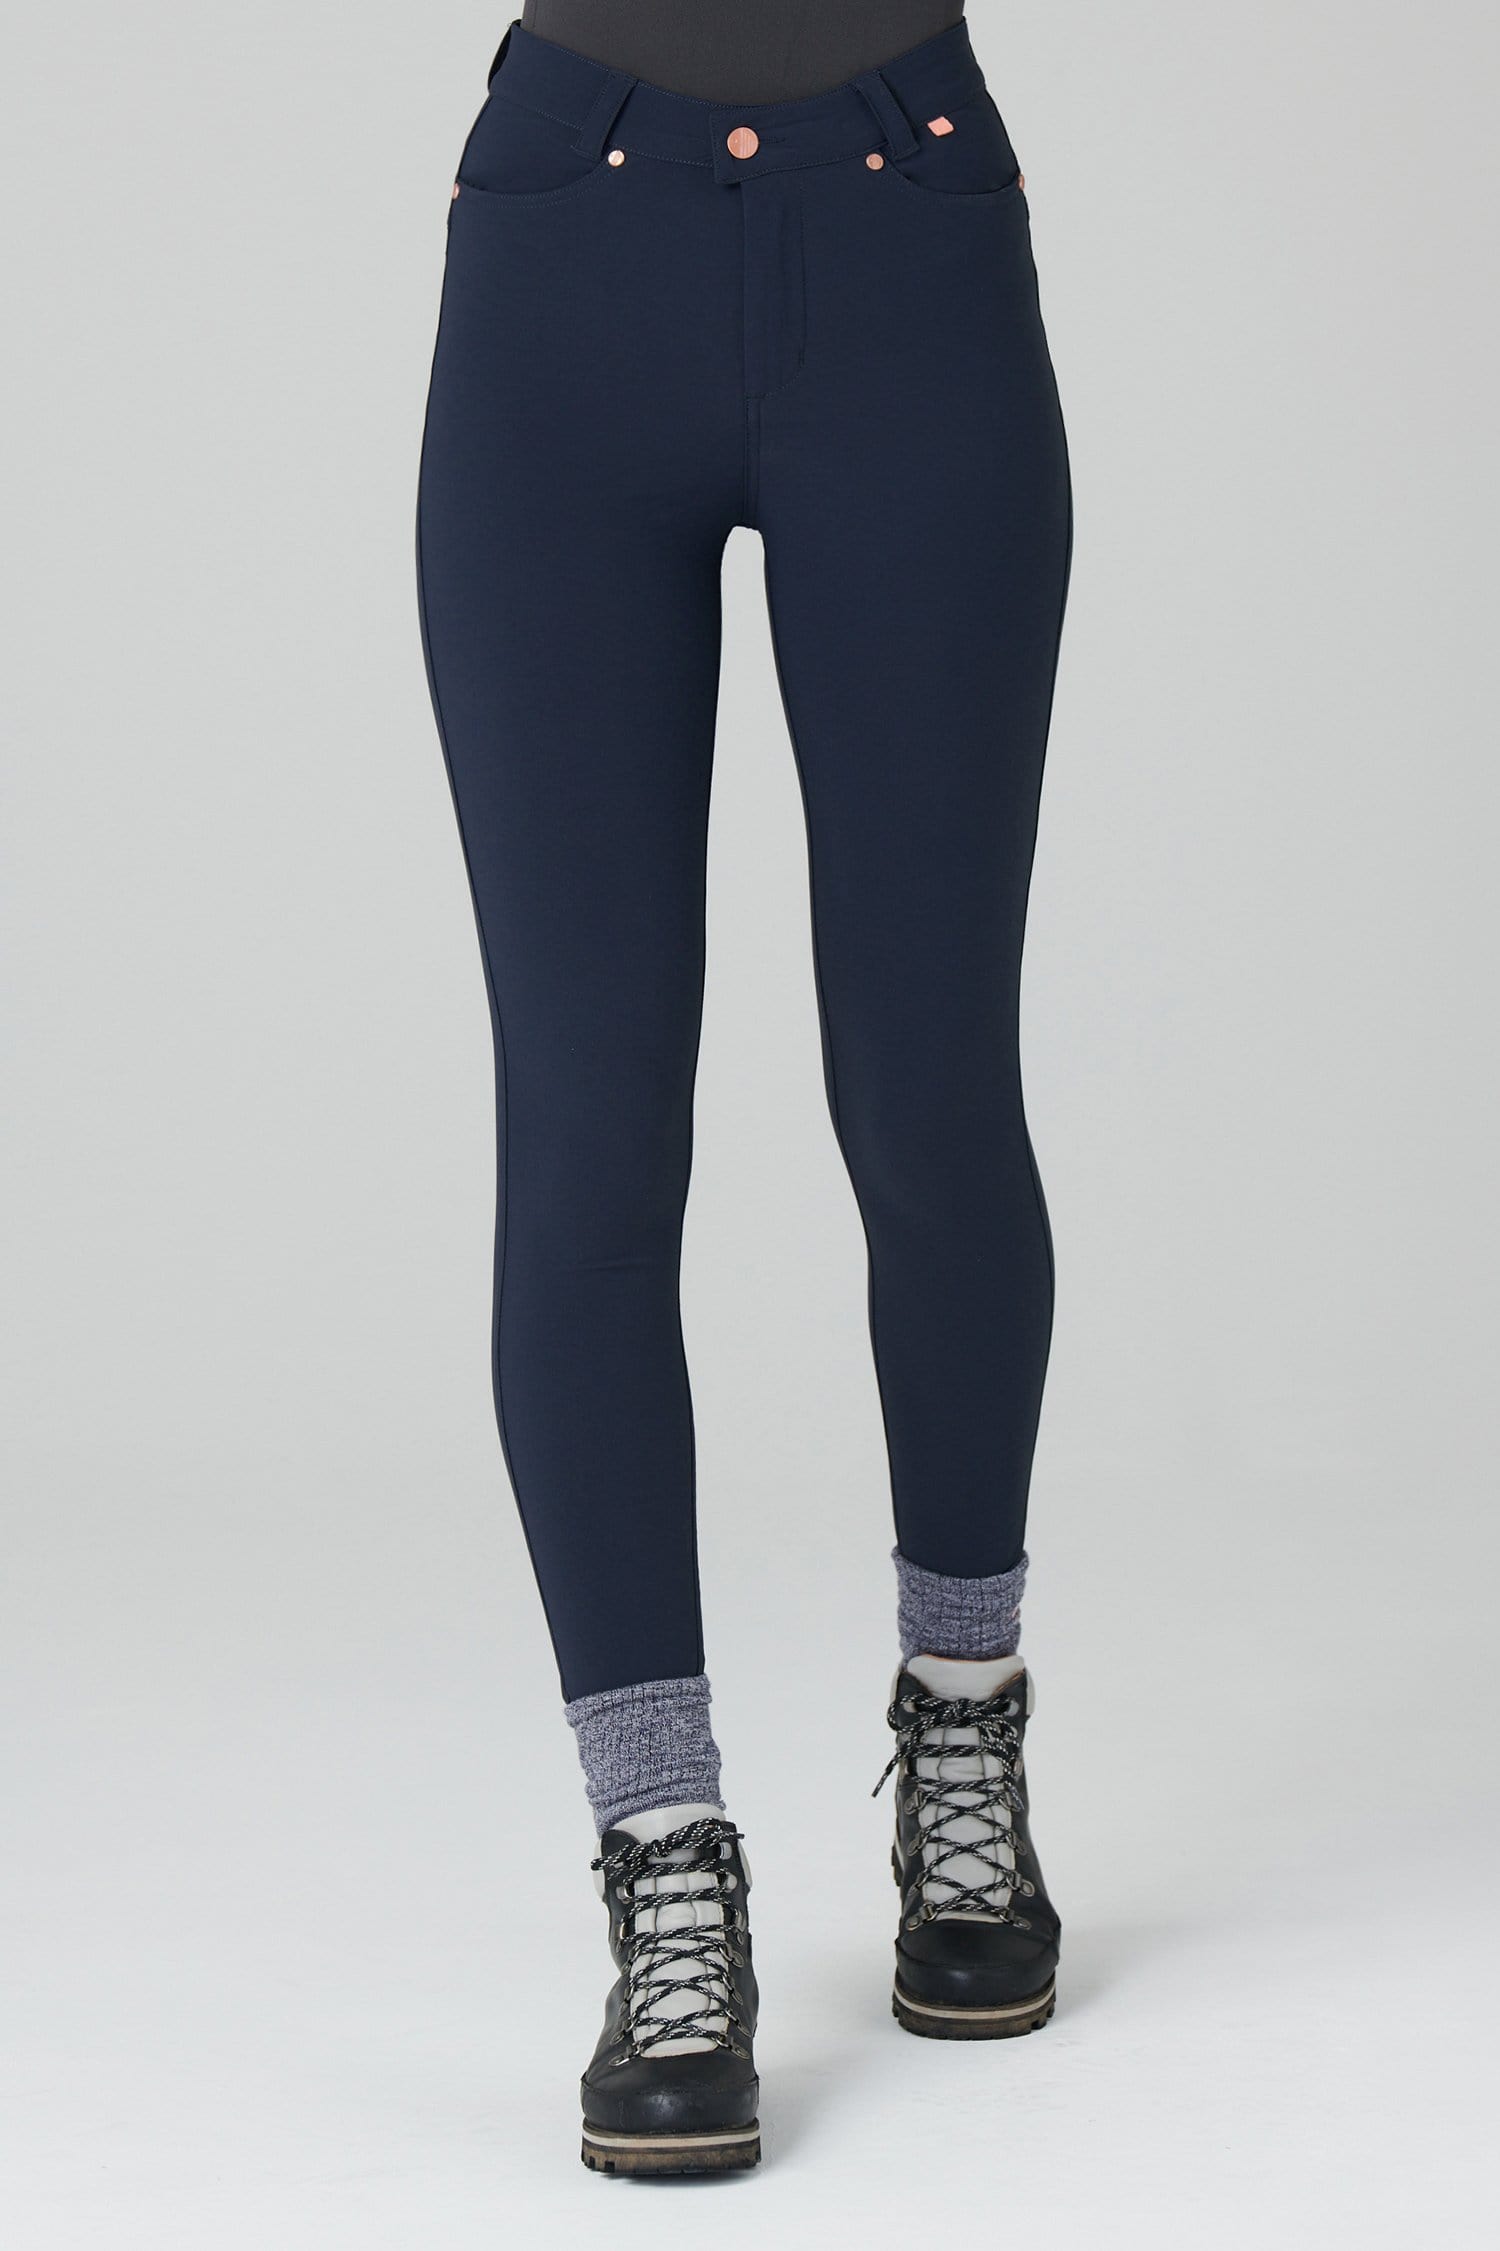 Thermal Skinny Outdoor Trousers - Deep Navy - 32l / Uk14 - Womens - Acai Outdoorwear